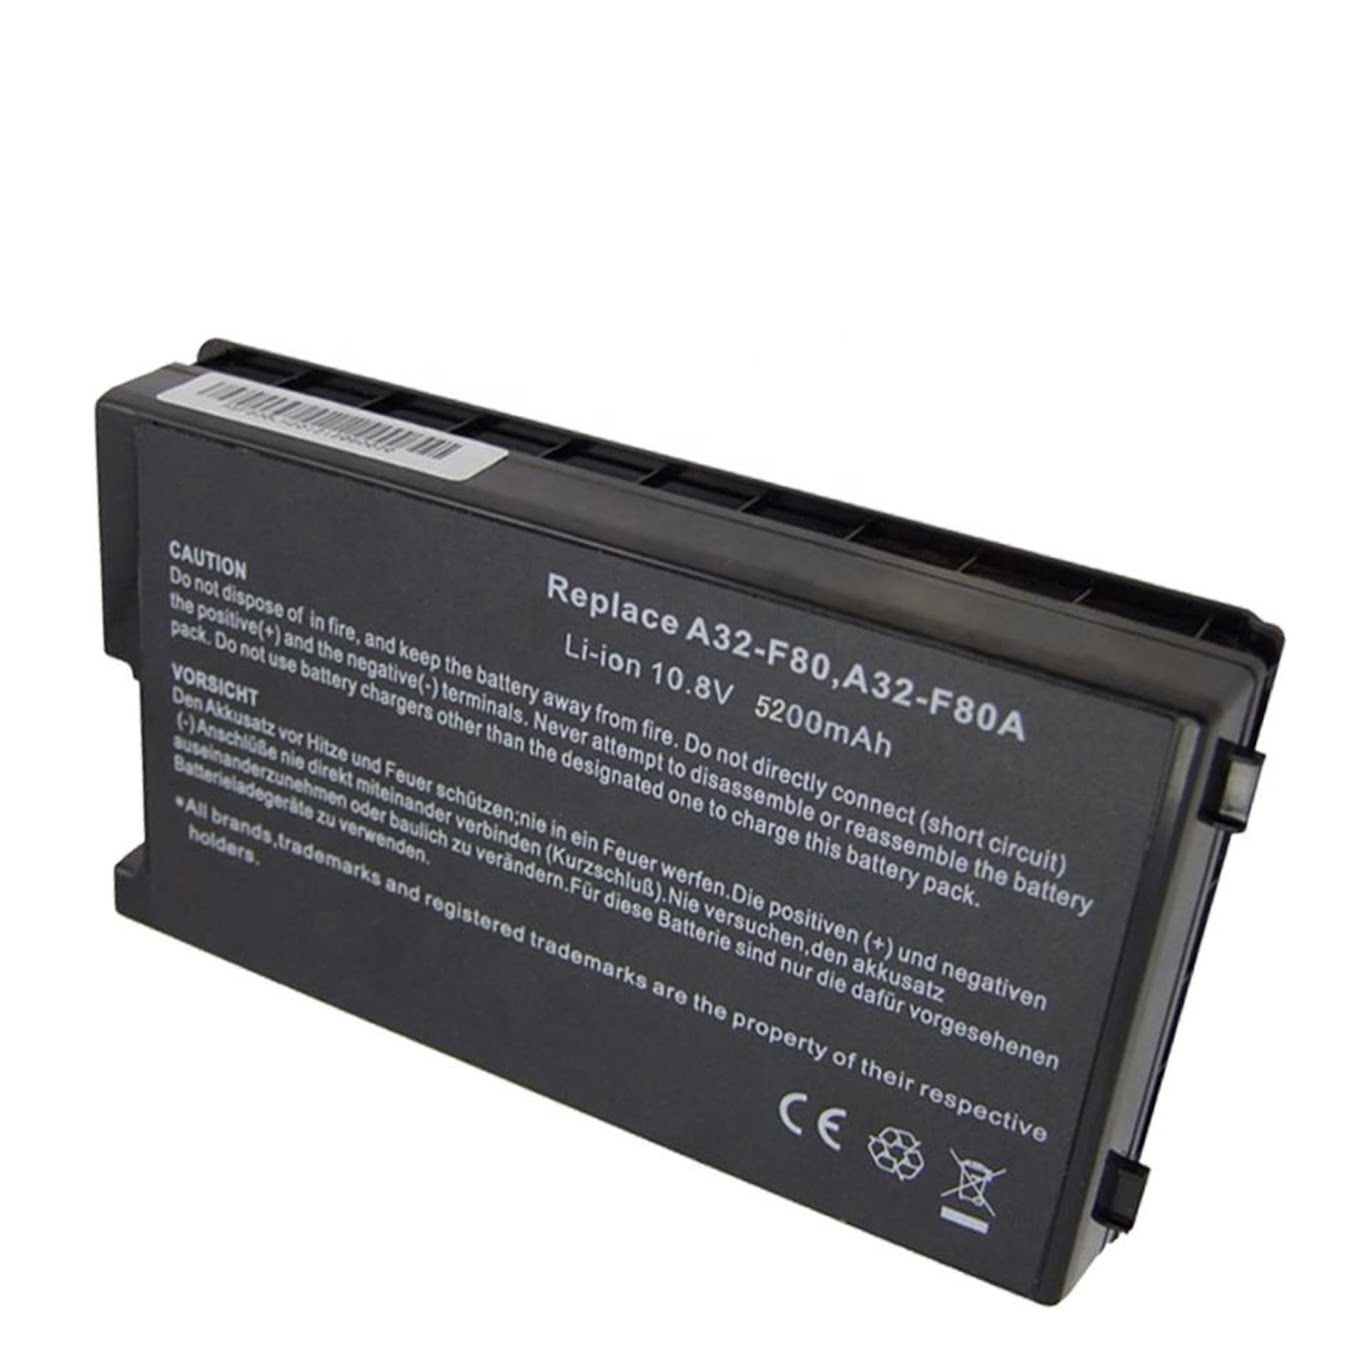 07G0165U1875M, A32-F80 replacement Laptop Battery for Asus F80, F80Cr, 6 cells, 10.8V, 4400mAh